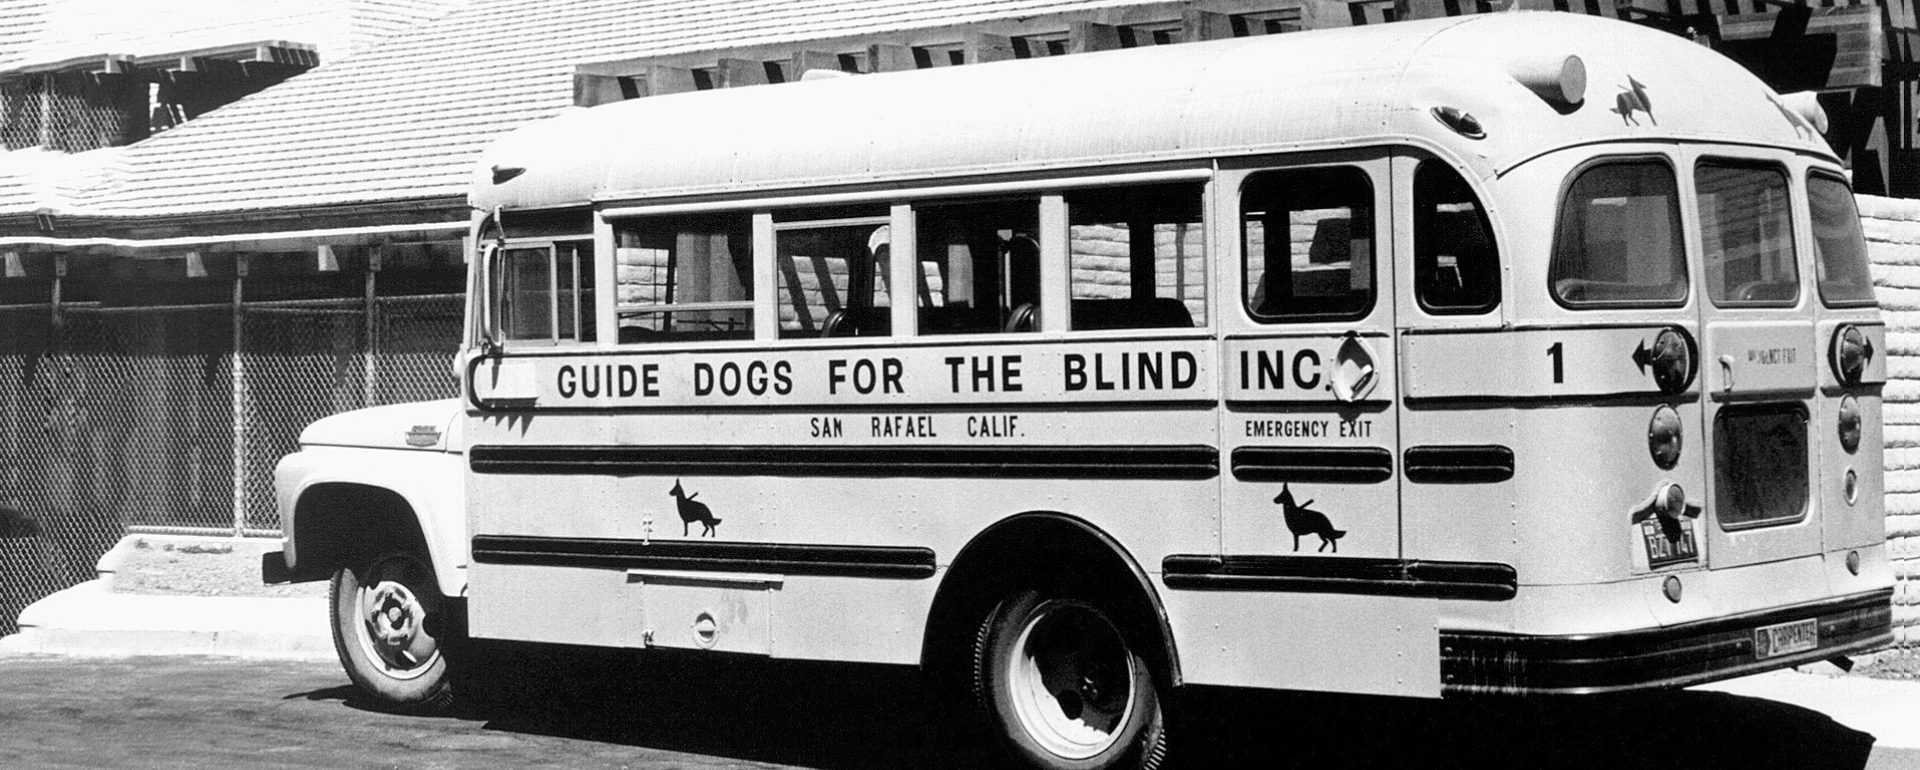 Black & white image of an old school bus that reads "Guide Dogs for the Blind - San Rafael, CA" on the side with the old shepherd logo